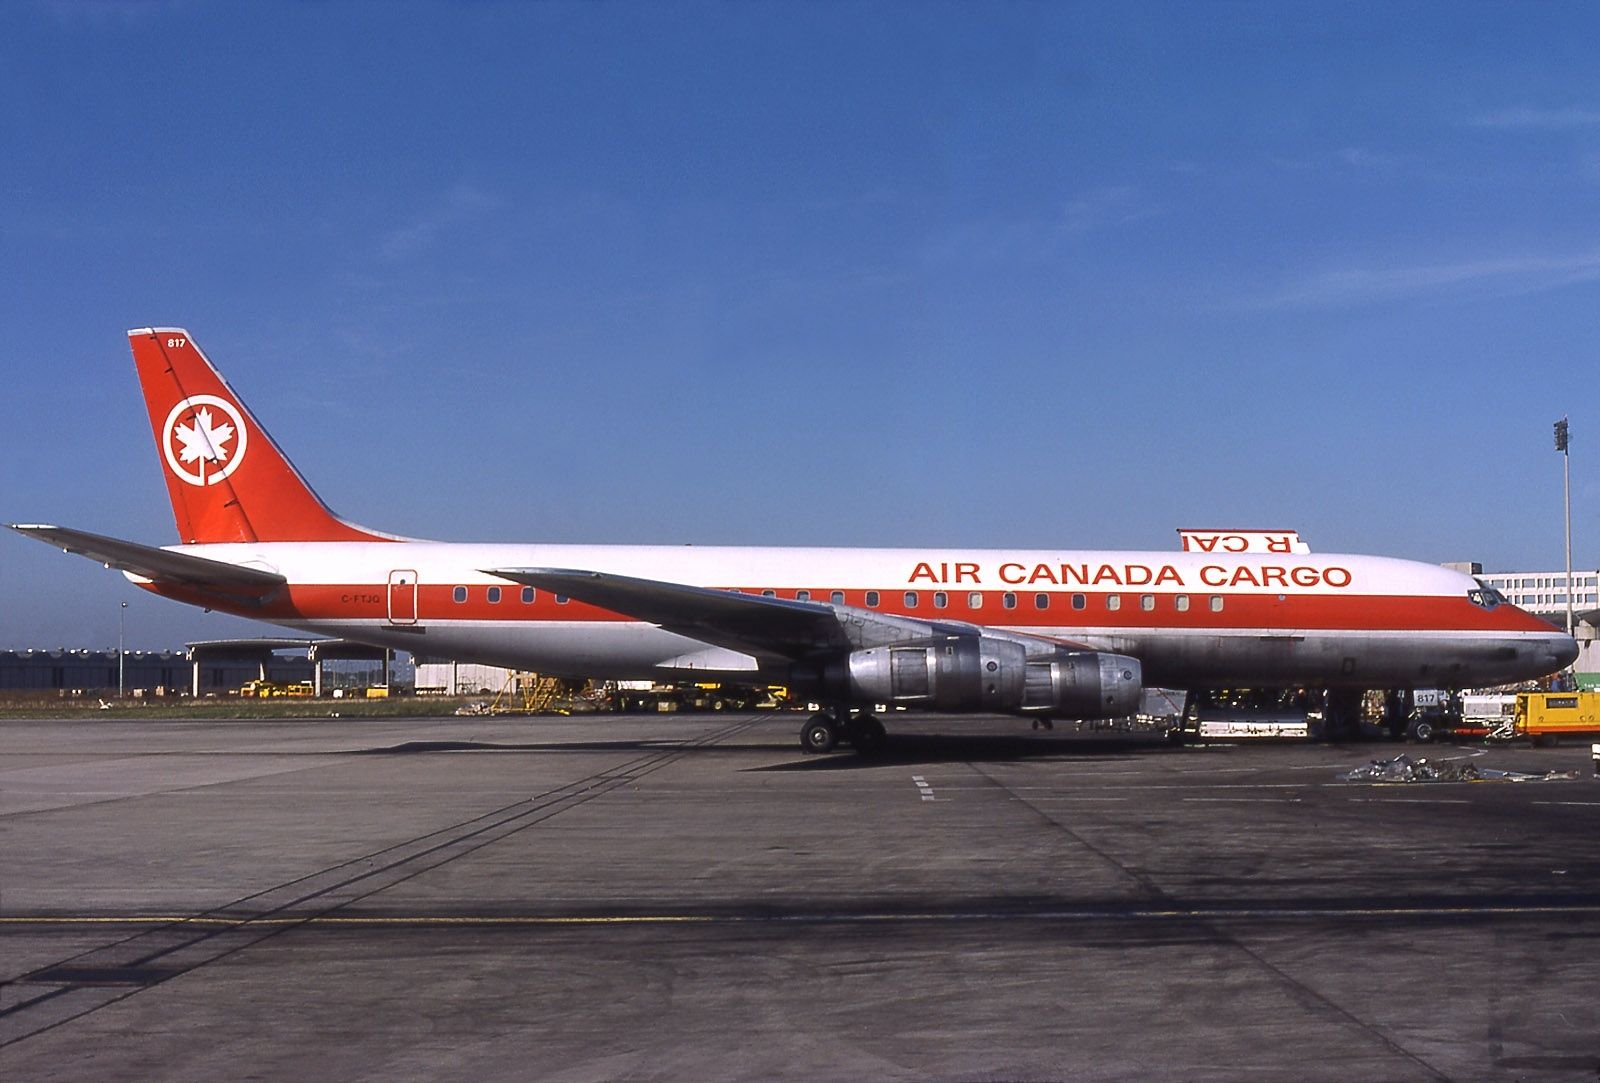 White jetliner with red paint on the side and marked Air Canada Cargo